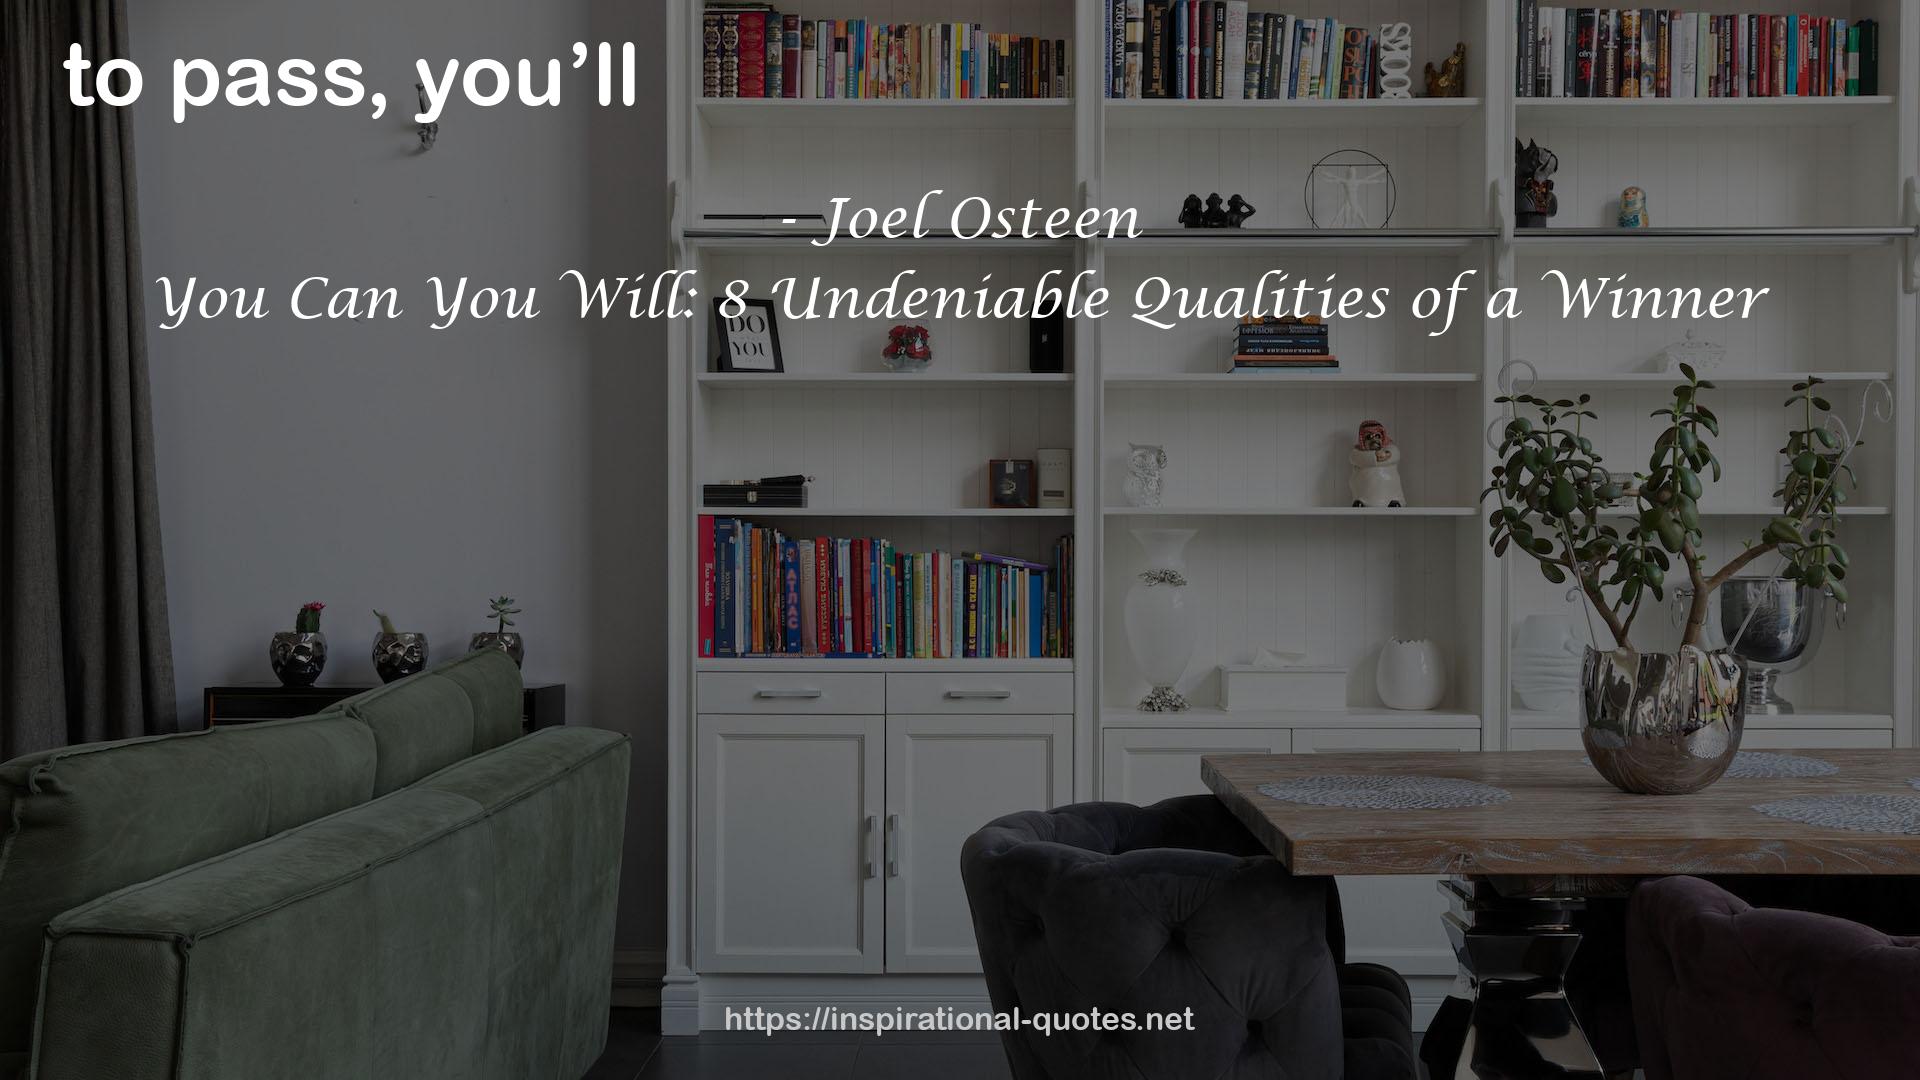 You Can You Will: 8 Undeniable Qualities of a Winner QUOTES